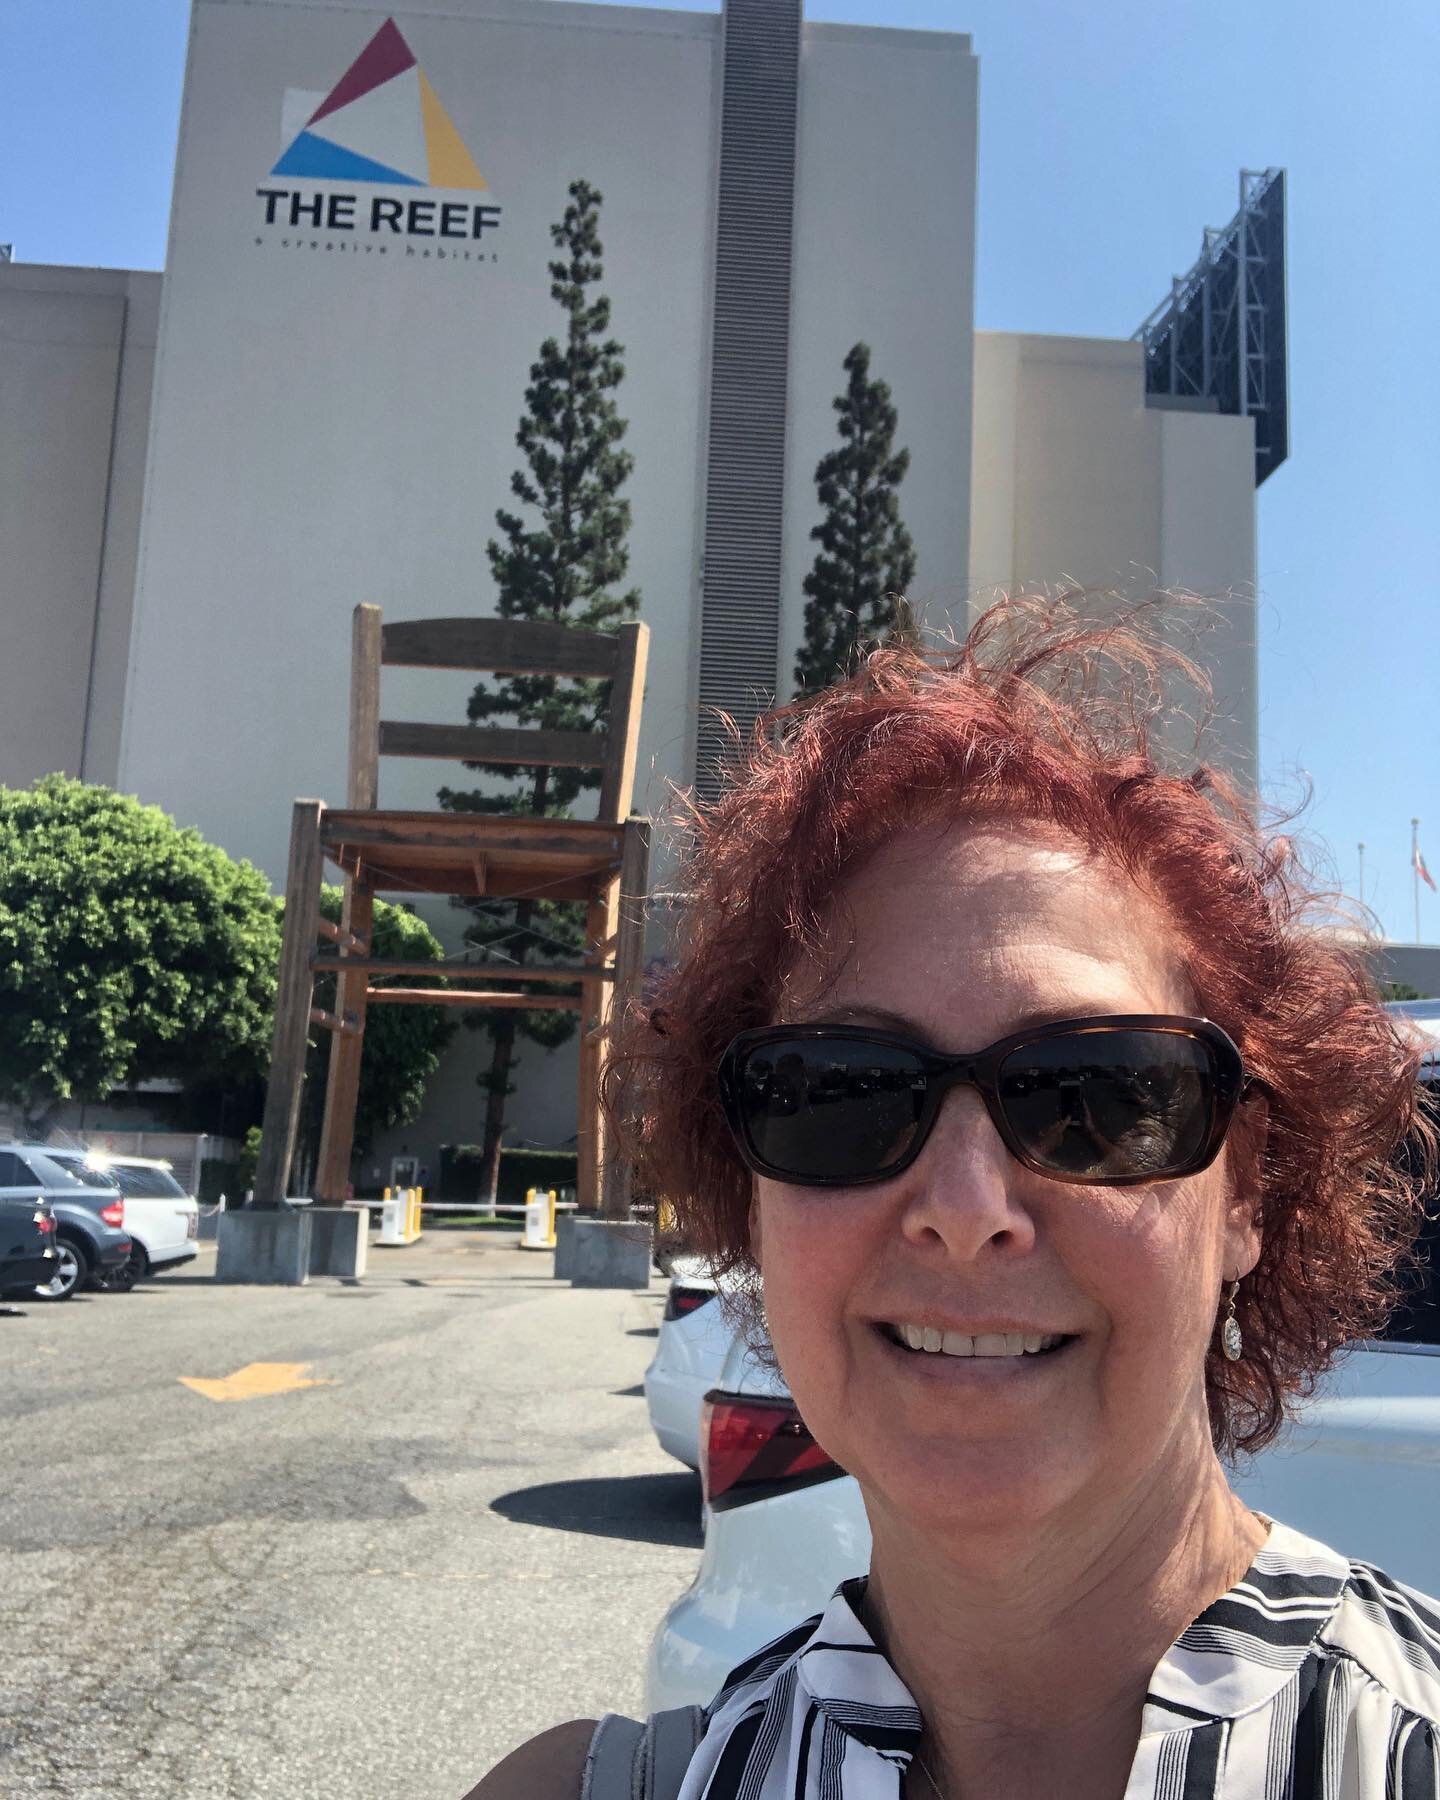 Today I'm at LA Mart at The Reef&mdash;seeing new products, creative design ideas, and meeting with reps. 🐠 🐡 🦀 🐙 🦑 🐟 🦐 🐚 

#behindthescenes #giftshow #buyer #sourcing #thereef #lamart #losangeles #cityofangels #buyingtrip #giantchair